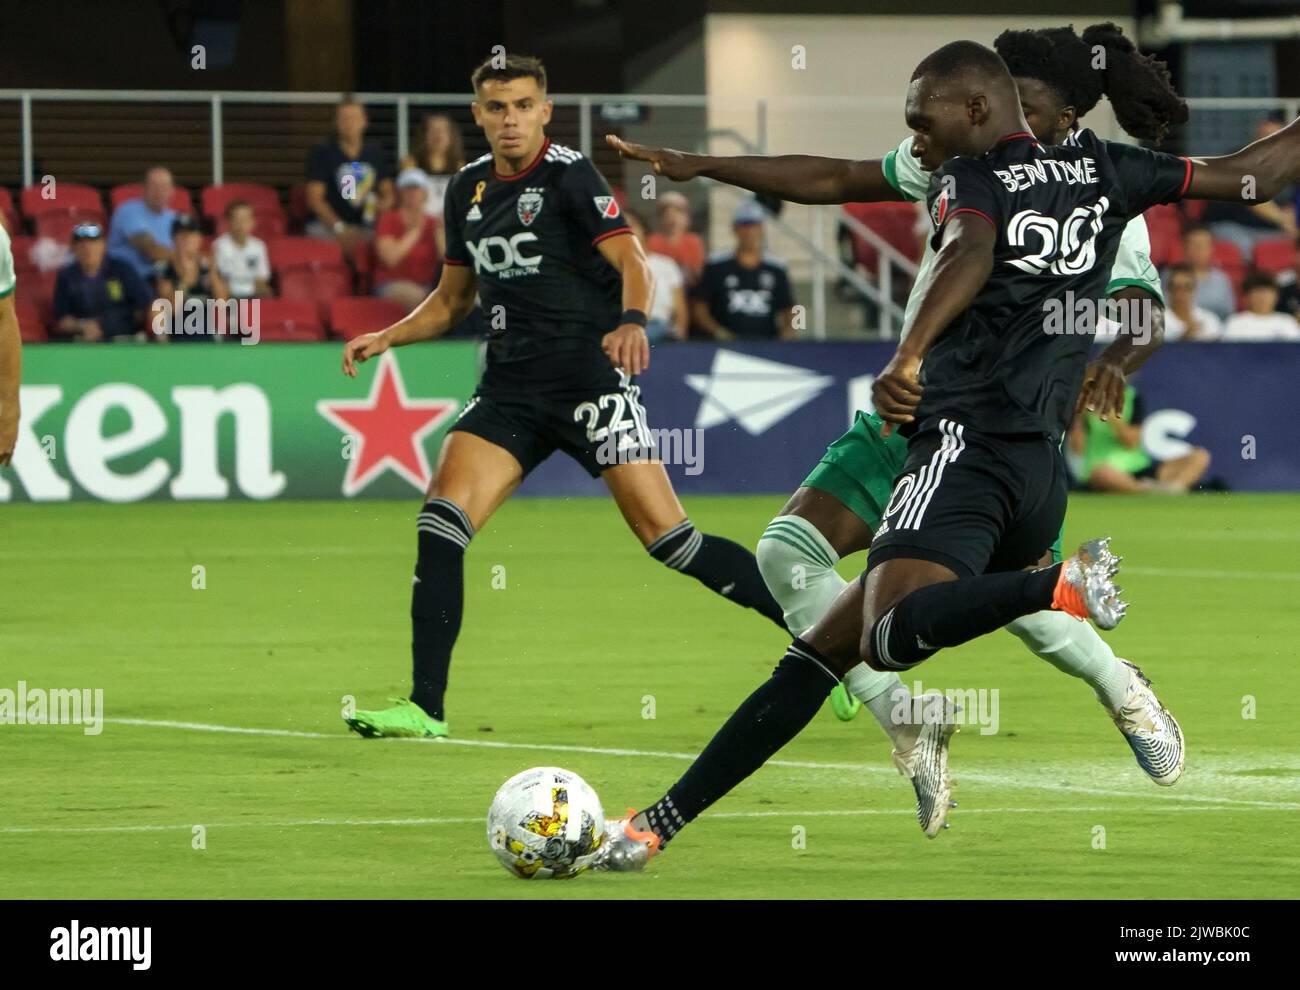 WASHINGTON, DC, USA - 4 SEPTEMBER 2022: D.C. United forward Christian Benteke (20) winds up for a shot during a MLS match between D.C United and the Colorado Rapids, on September 04, 2022, at Audi Field, in Washington, DC. (Photo by Tony Quinn-Alamy Live News) Stock Photo